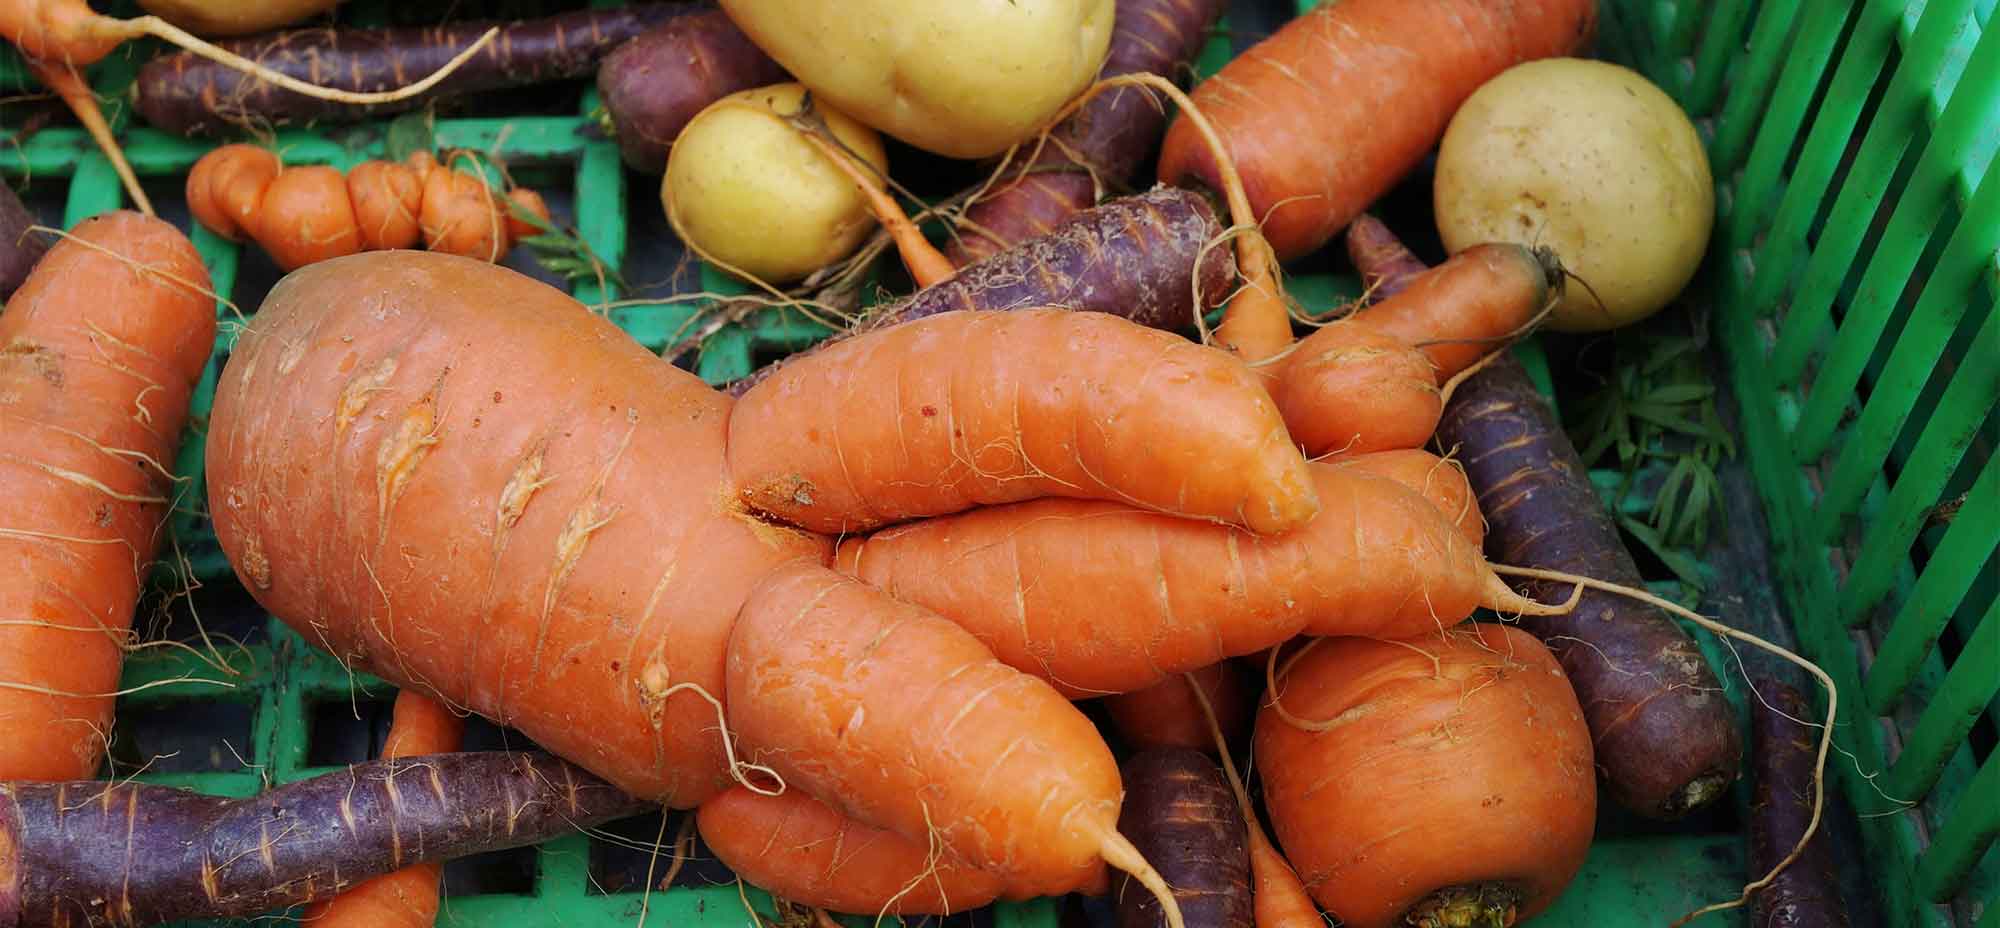 Image shows carrots placed on a board